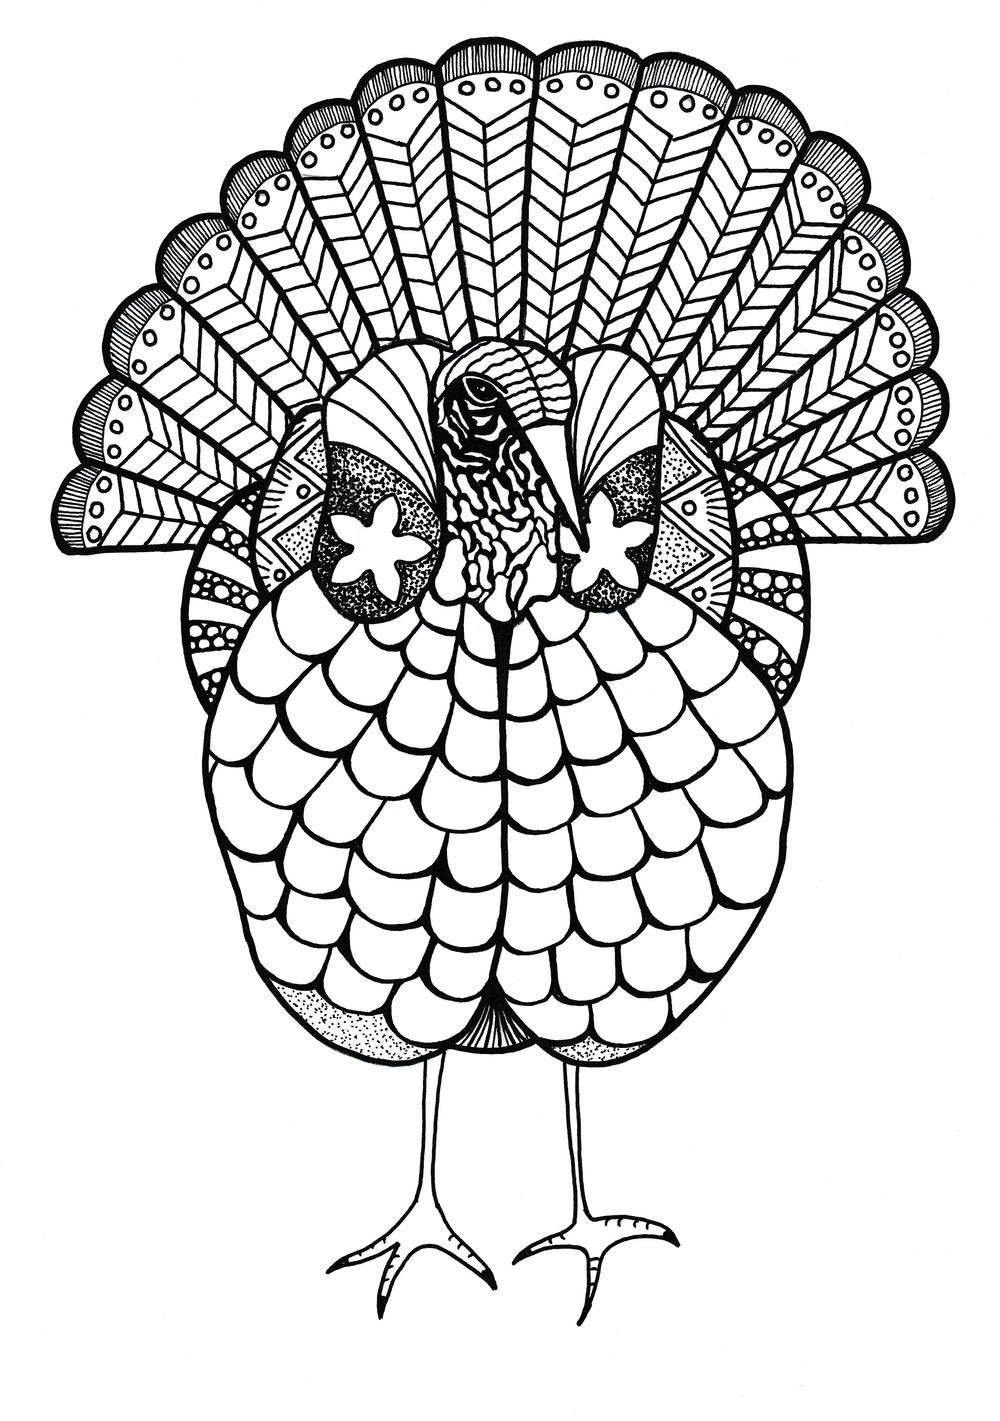 Colorful Turkey Adult Coloring Page FaveCraftscom